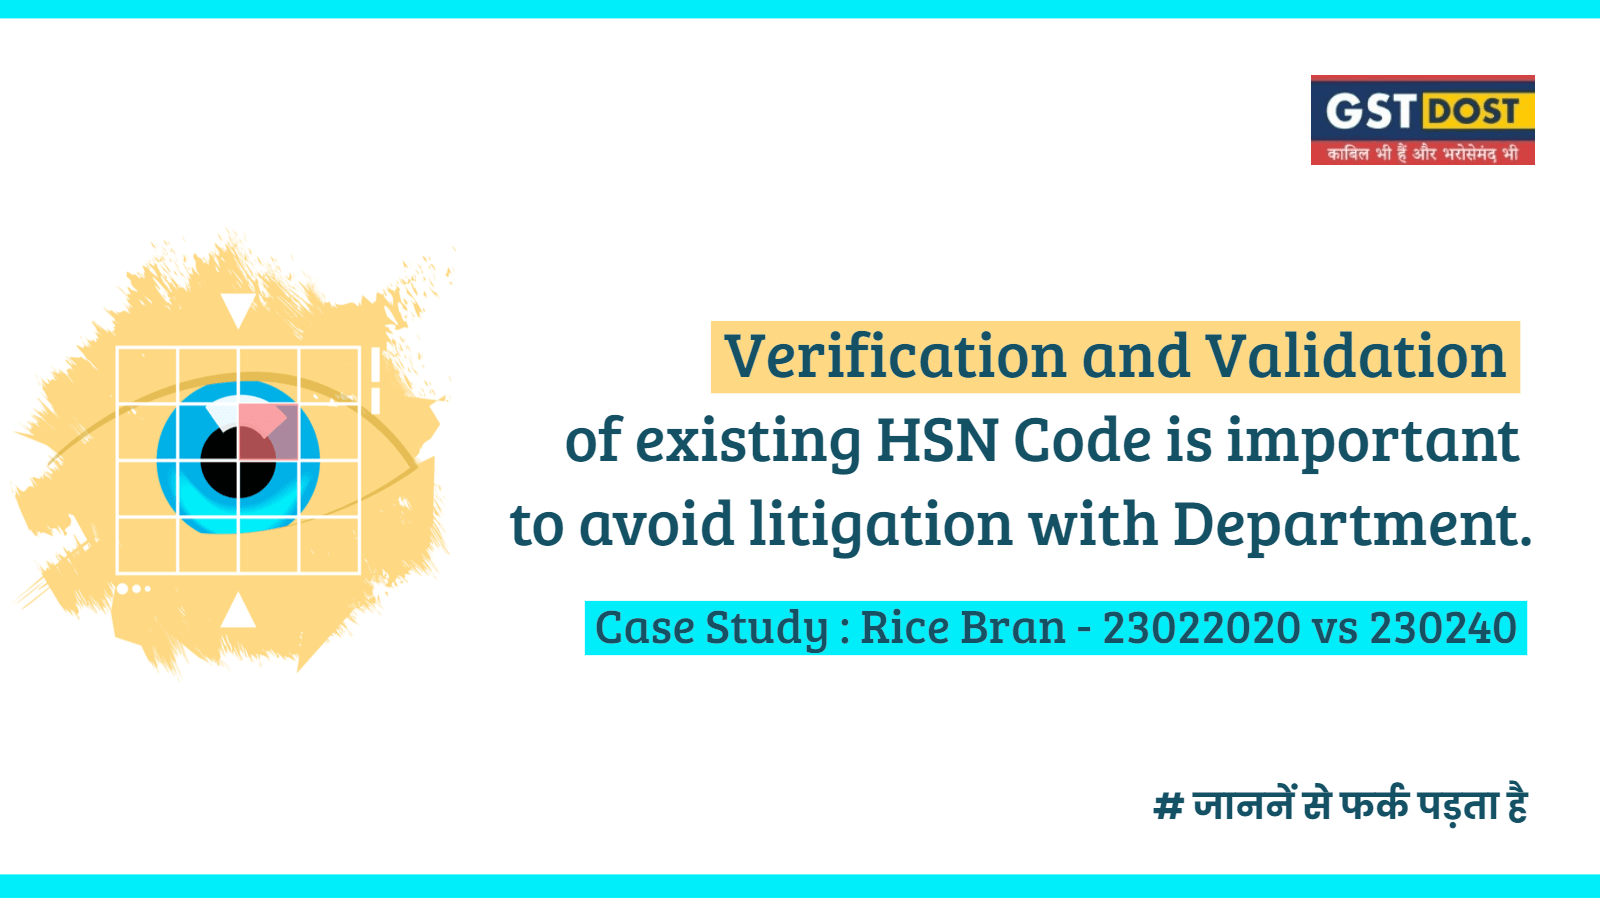 Are you Verifying your Old HSN Codes? Read on to find Why it is Important! [Case Study - Rice Bran - 23022020 vs 230240]